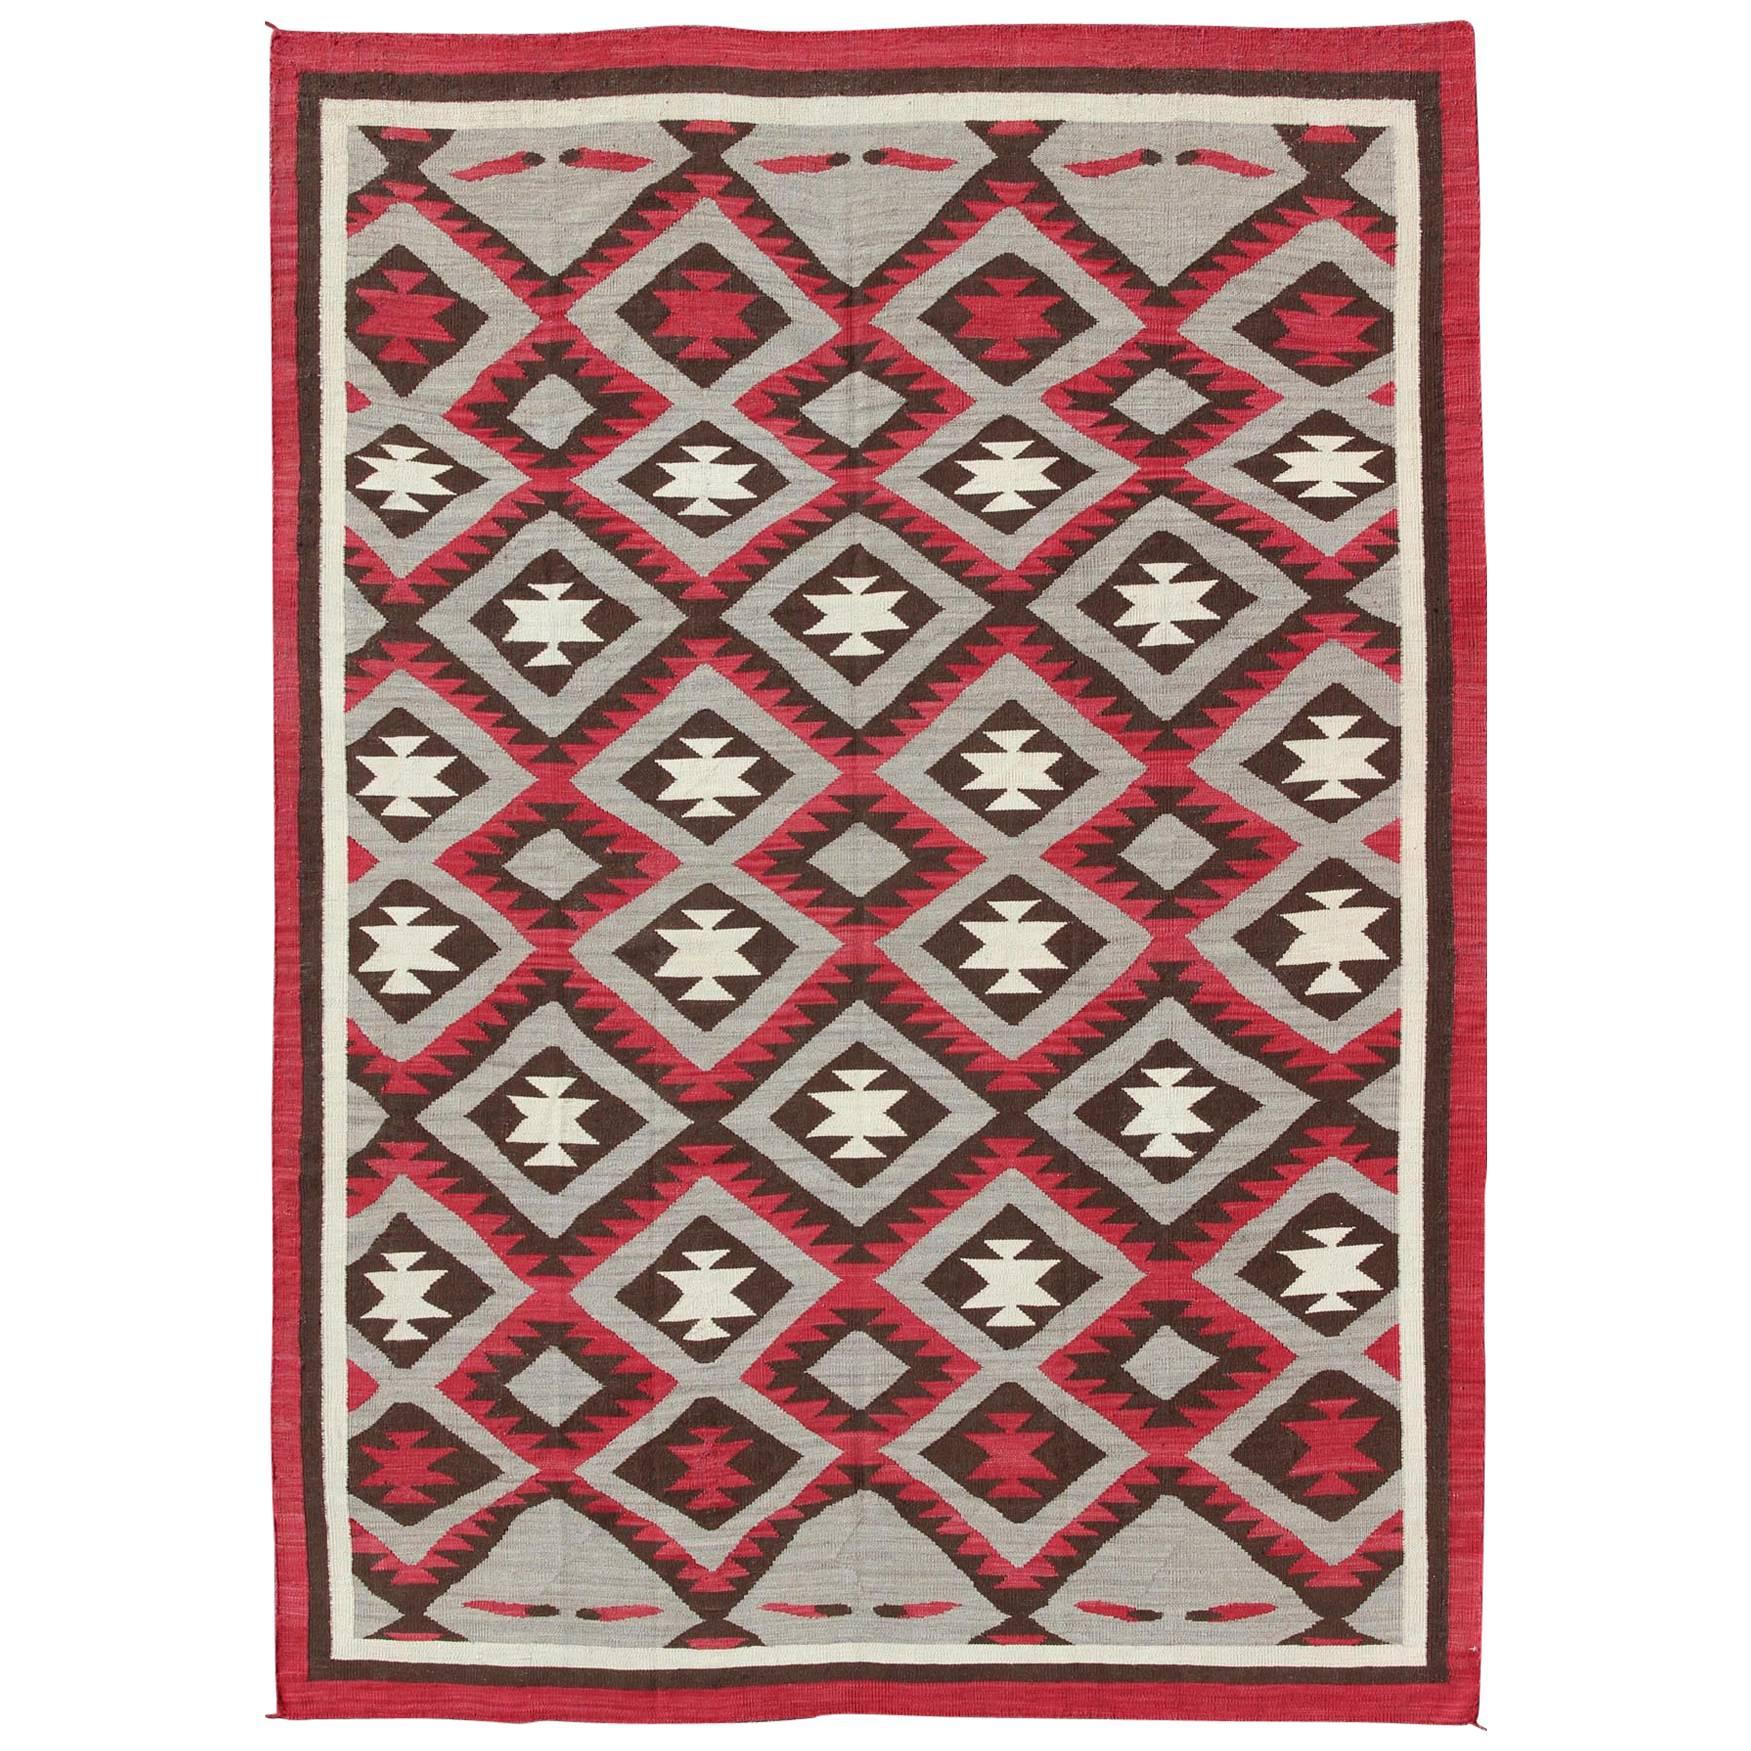 Large American Navajo Design Rug with Latticework Tribal Design in Red and Gray